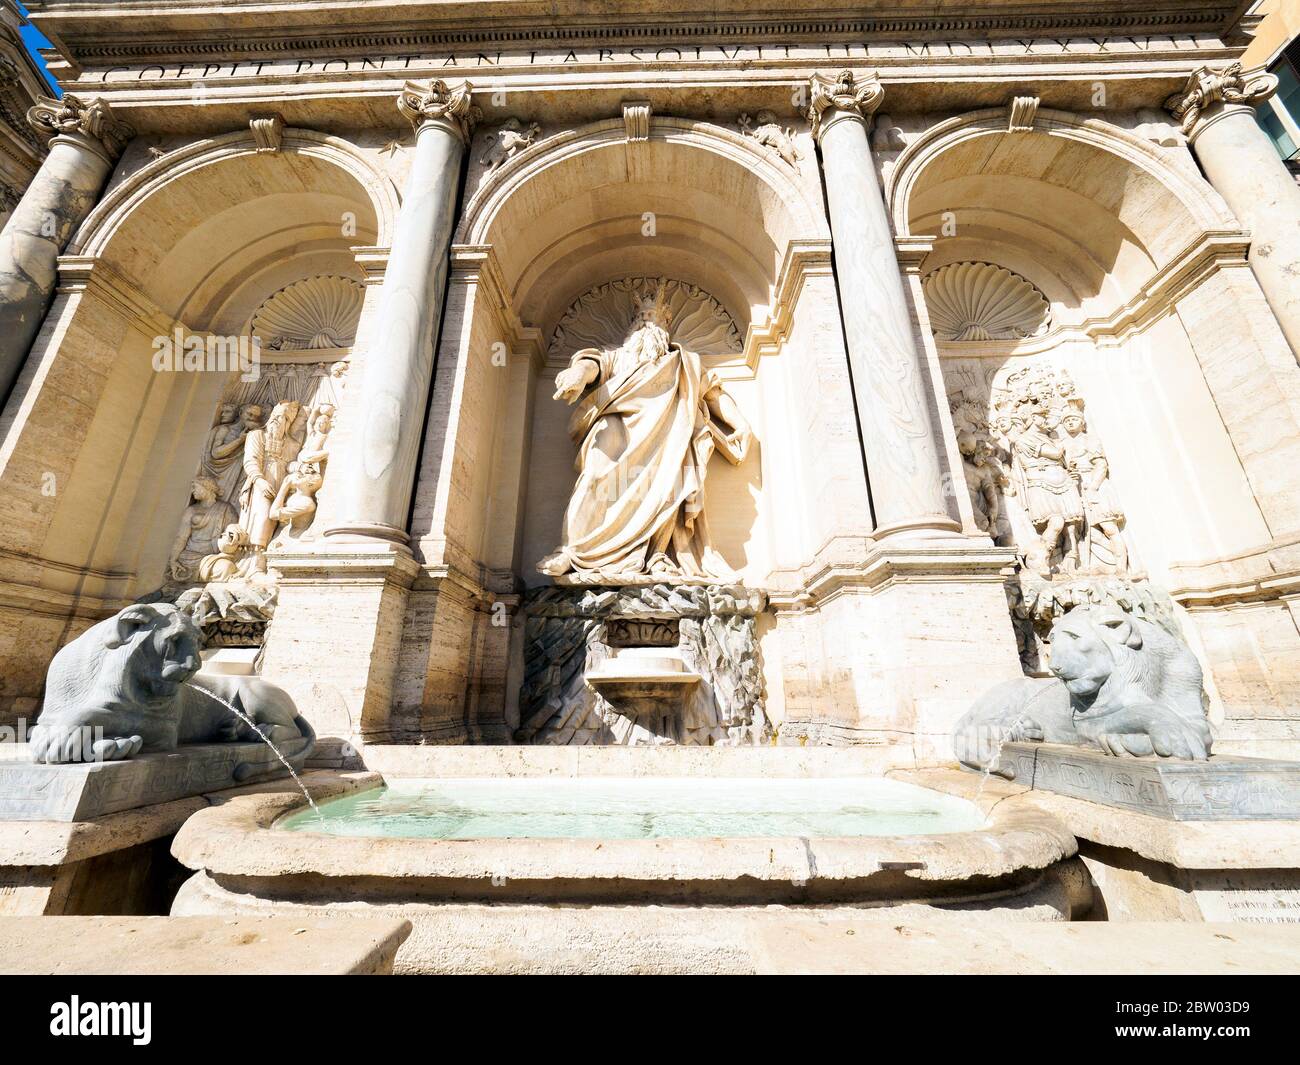 The Fontana dell'Acqua Felice, also called the Fountain of Moses. It marked the terminus of the Acqua Felice aqueduct restored by Pope Sixtus V. It was designed by Domenico Fontana and built in 1585-88 - Rome, Italy Stock Photo